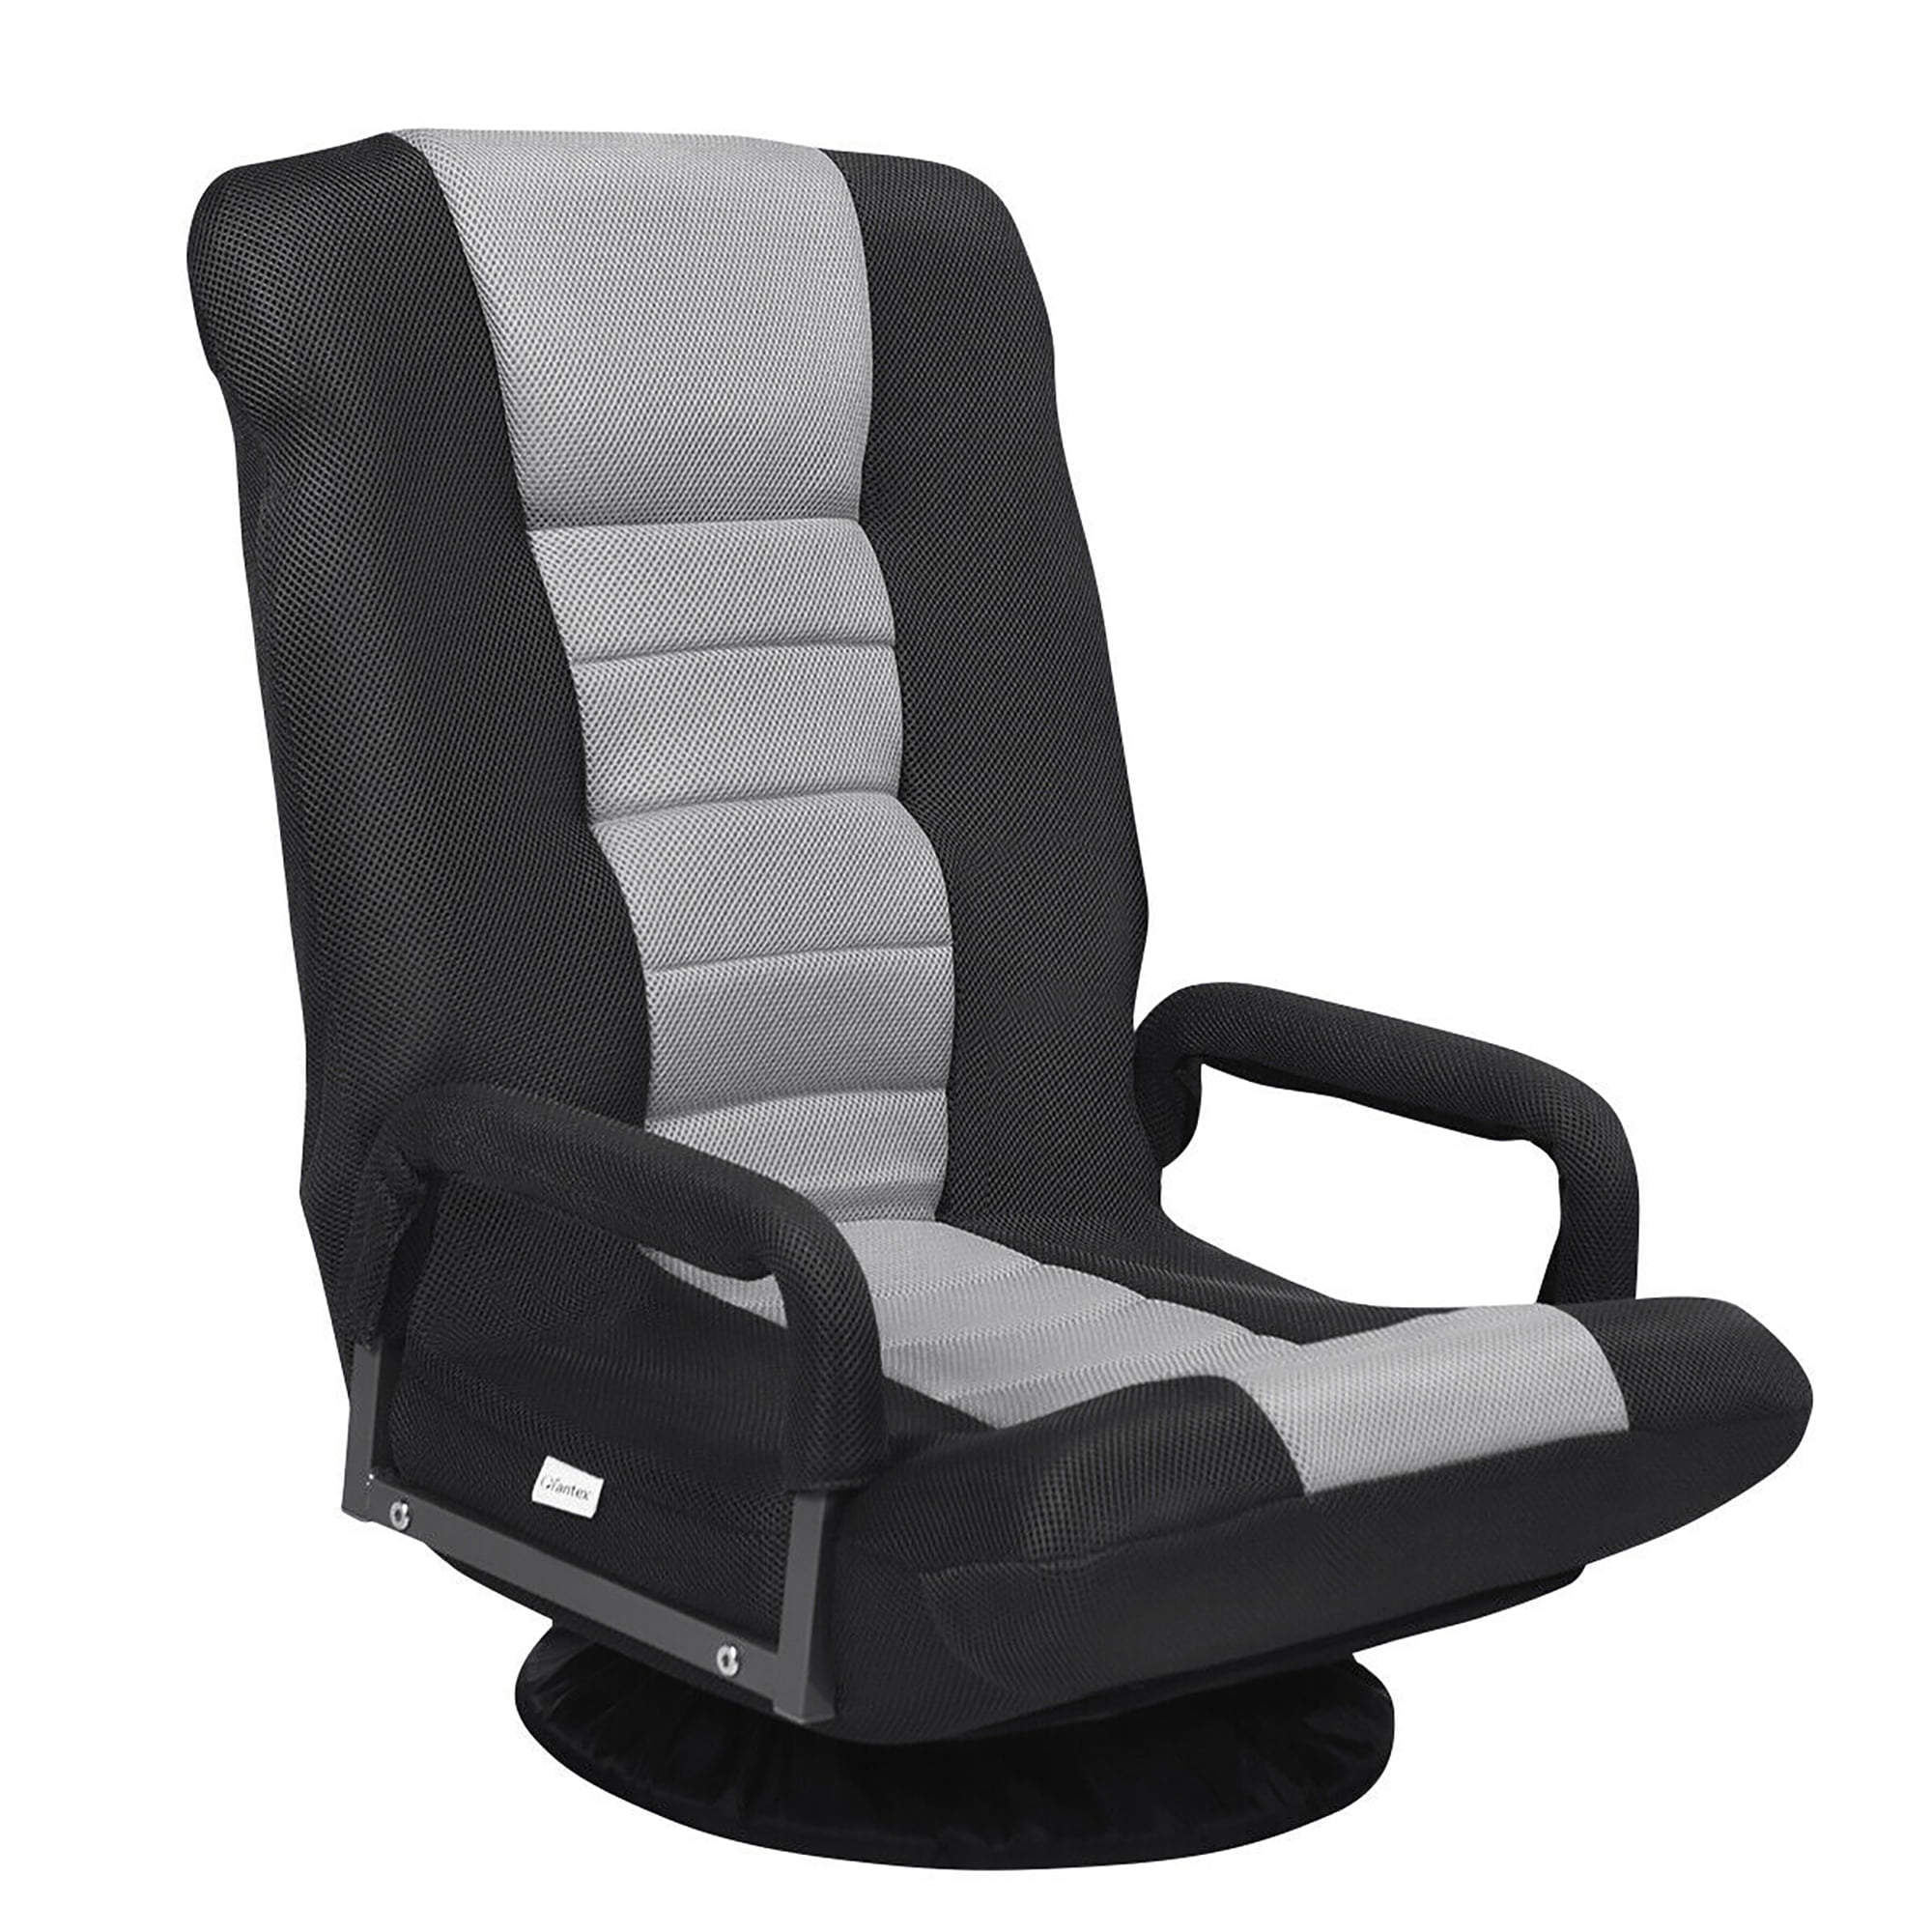 360Degree Swivel Gaming Floor Chair with Foldable